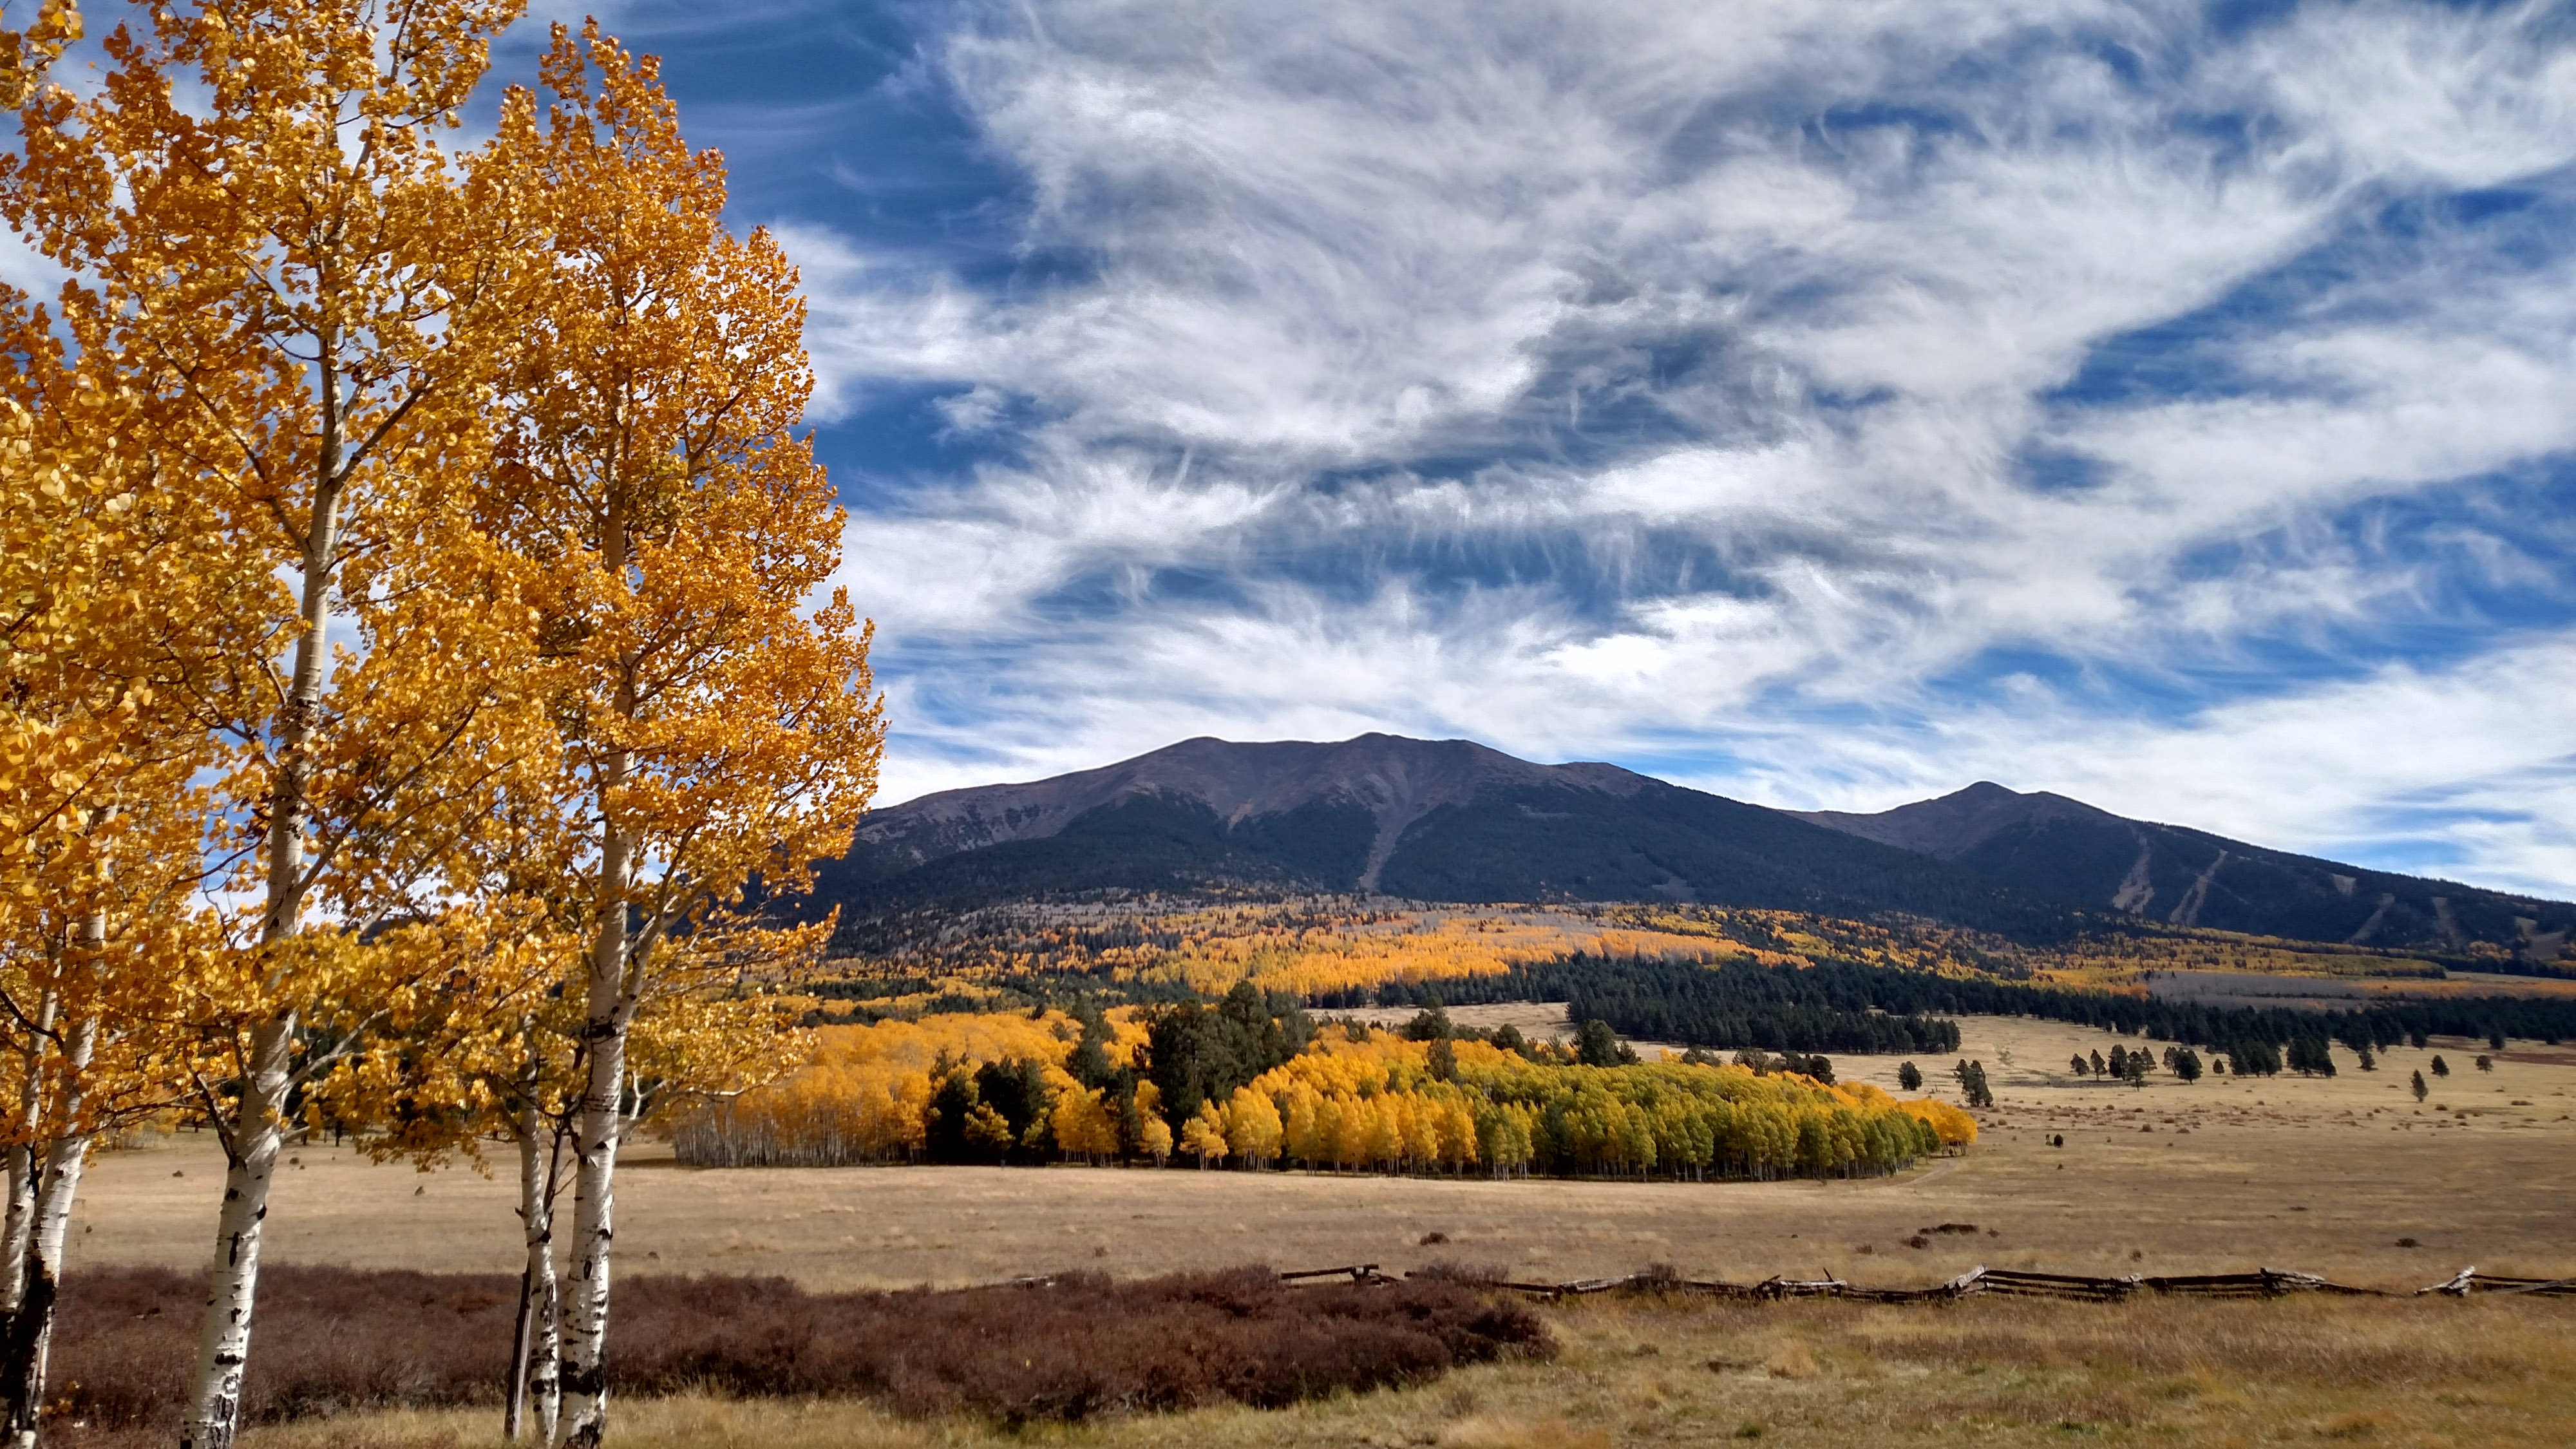 Aspen trees with golden fall leaves in the foreground with mountain peaks and more fall trees in the background.